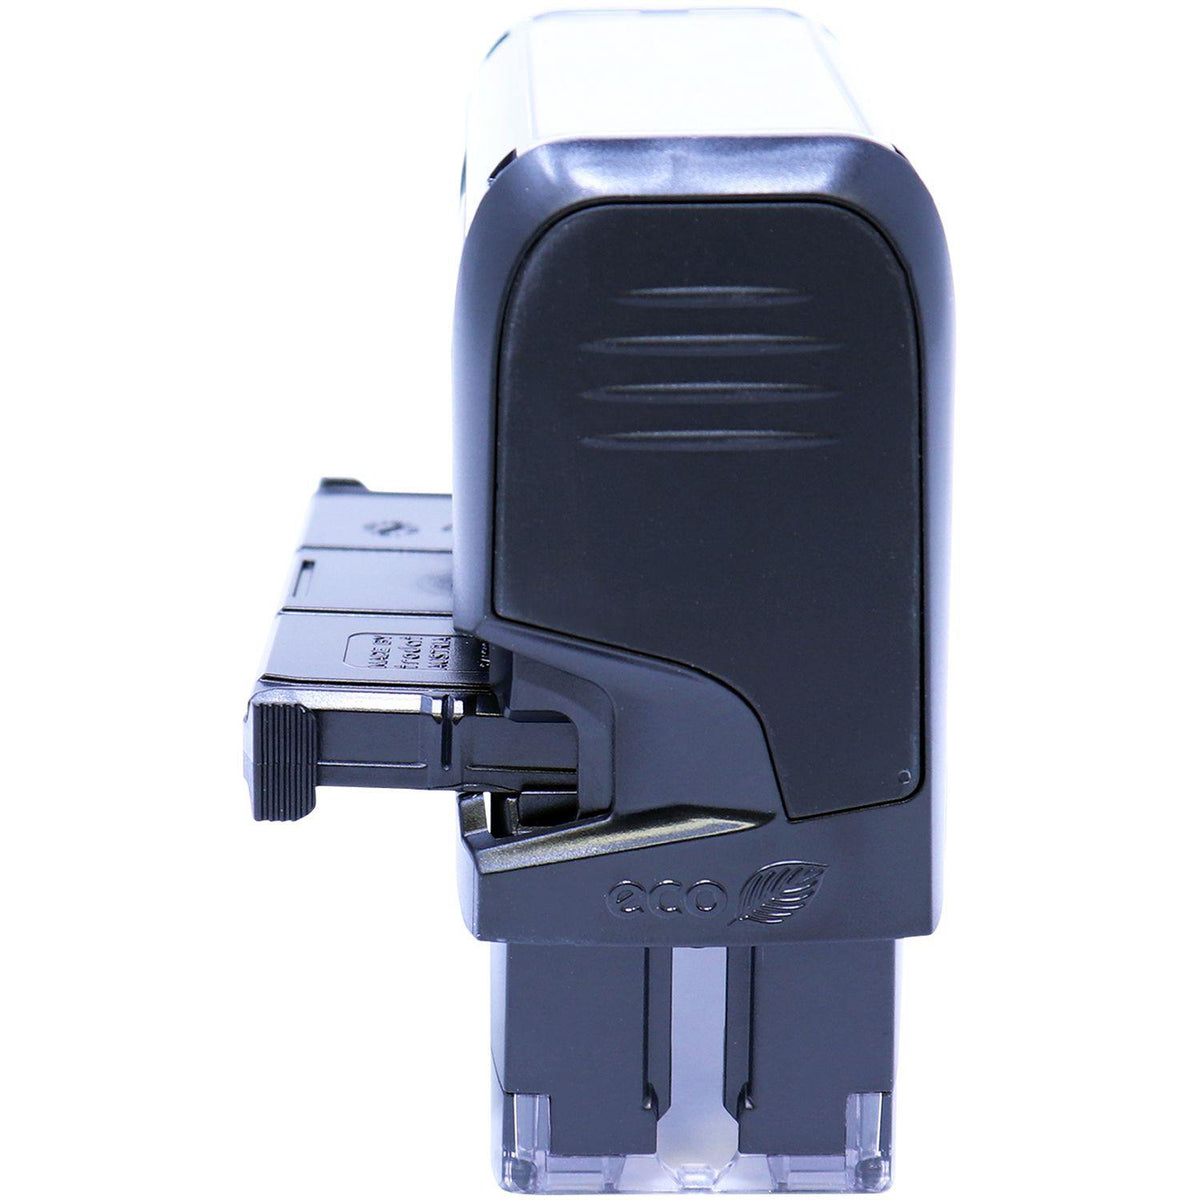 Self Inking Copy Stamp - Engineer Seal Stamps - Brand_Trodat, Impression Size_Small, Stamp Type_Self-Inking Stamp, Type of Use_Office